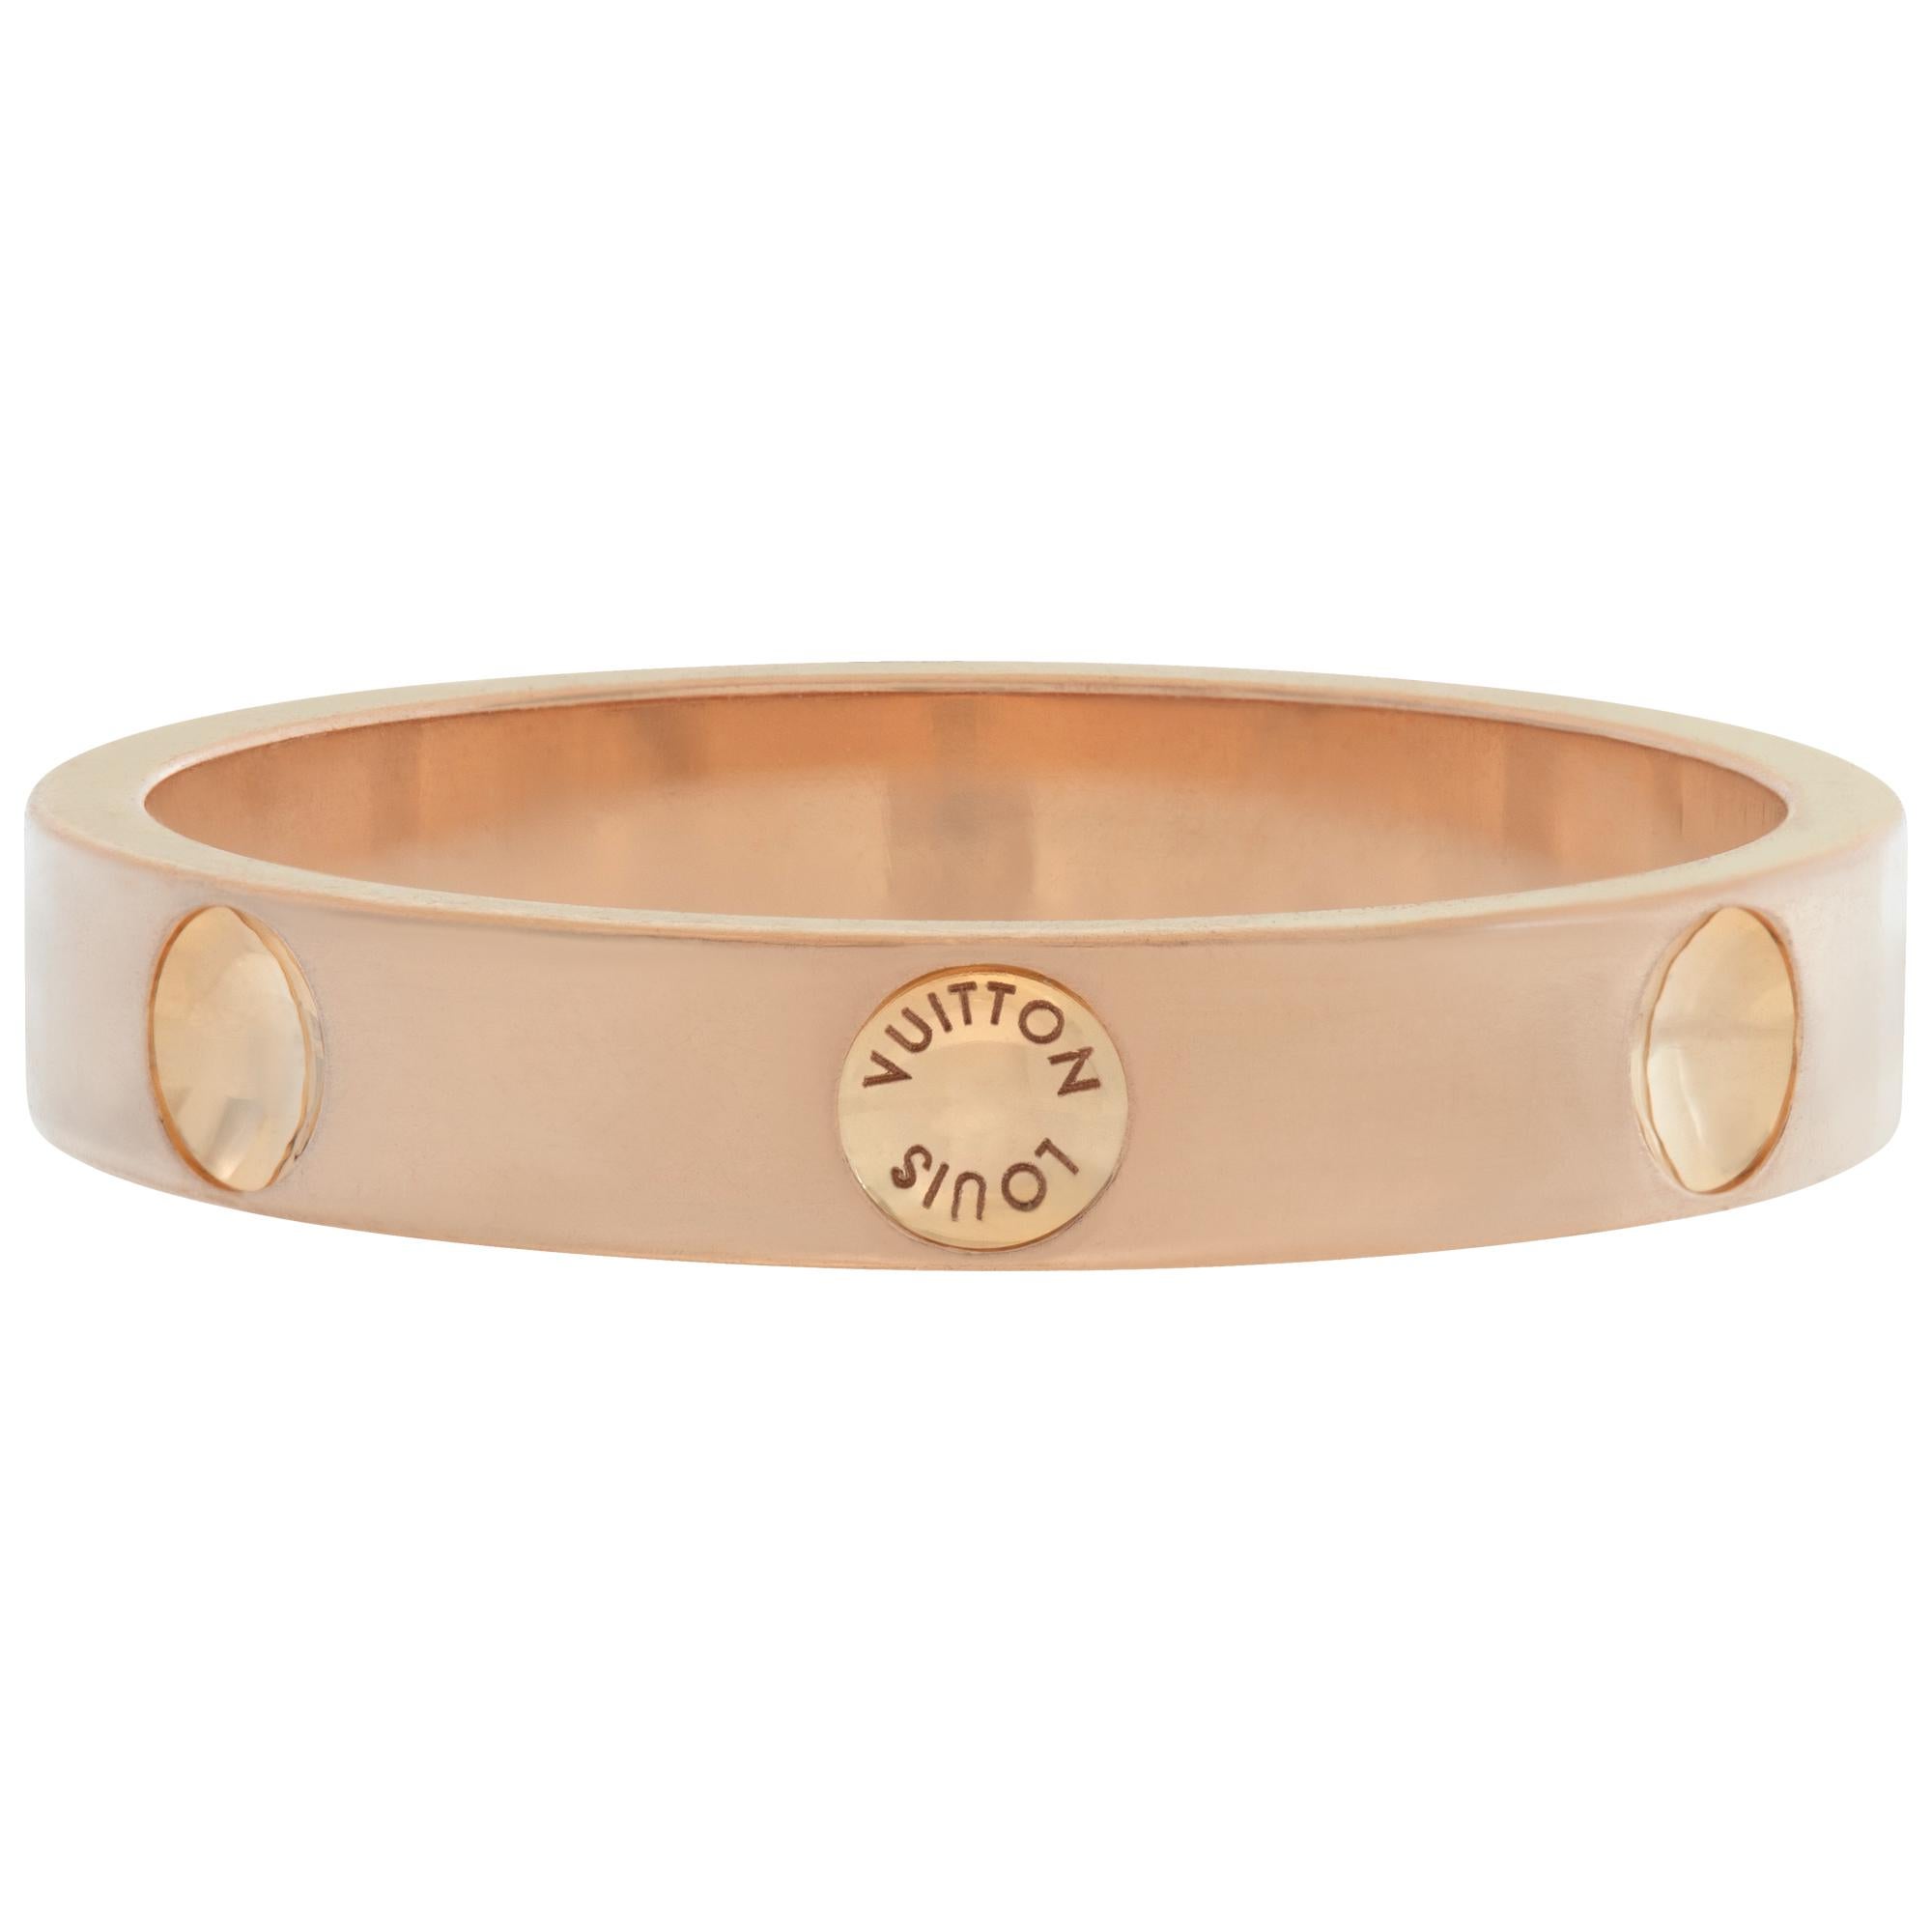 Louis Vuitton Empreinte wedding band in 18k rose gold. Size 55, width 3mm.This Louis Vuitton ring is currently size 7.25 and some items can be sized up or down, please ask! It weighs 2.5 pennyweights and is 18k rose gold.